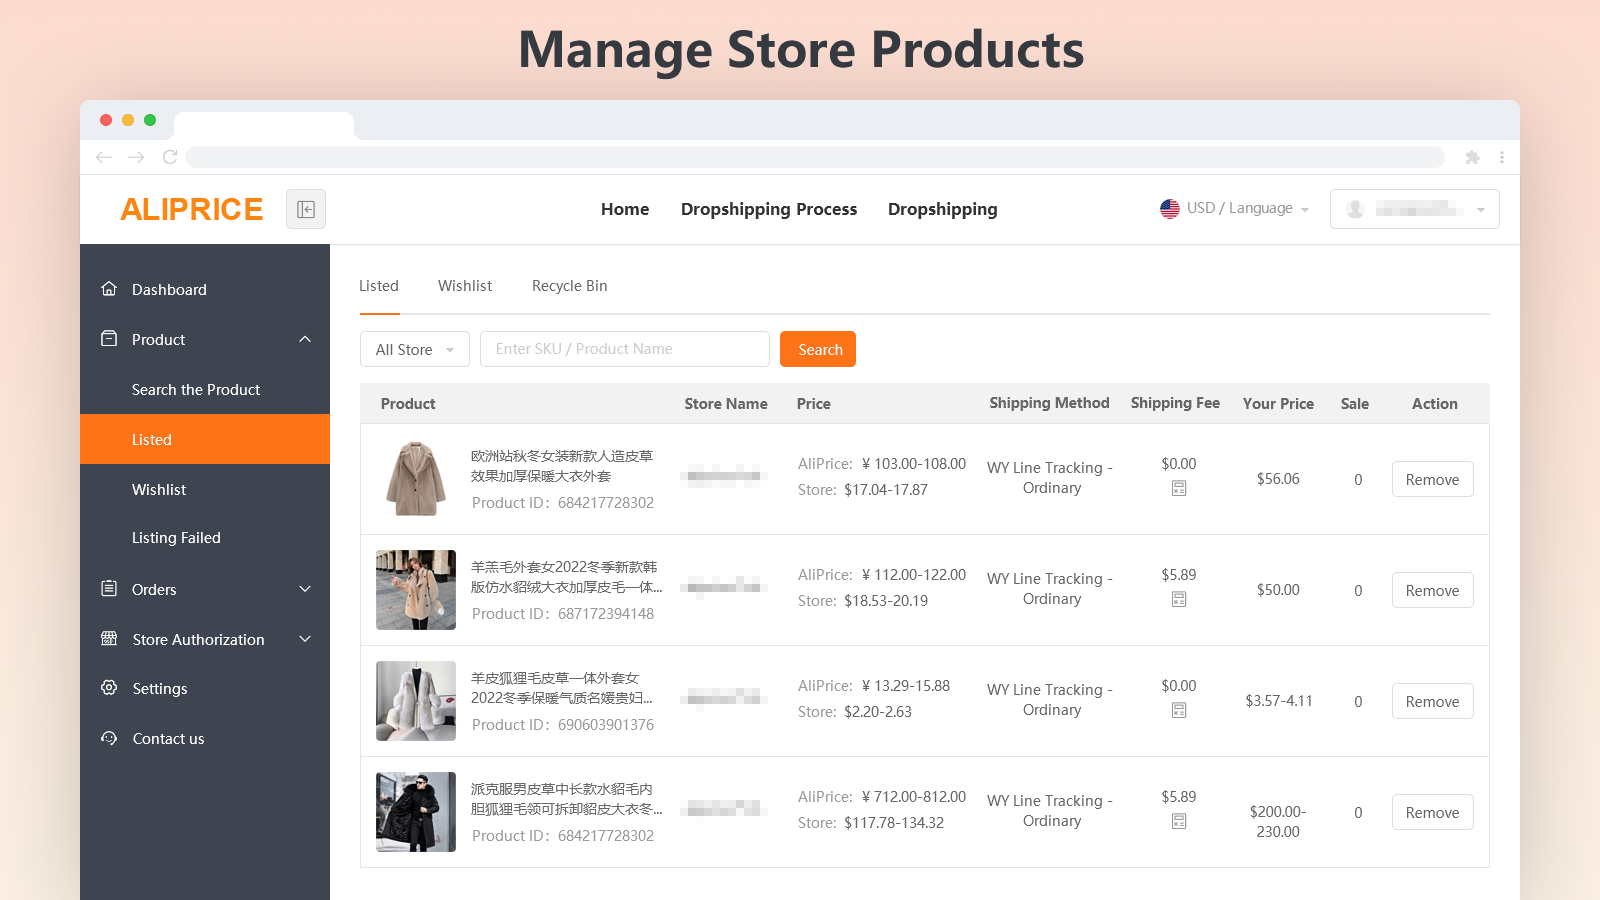 Manage store products, user interface